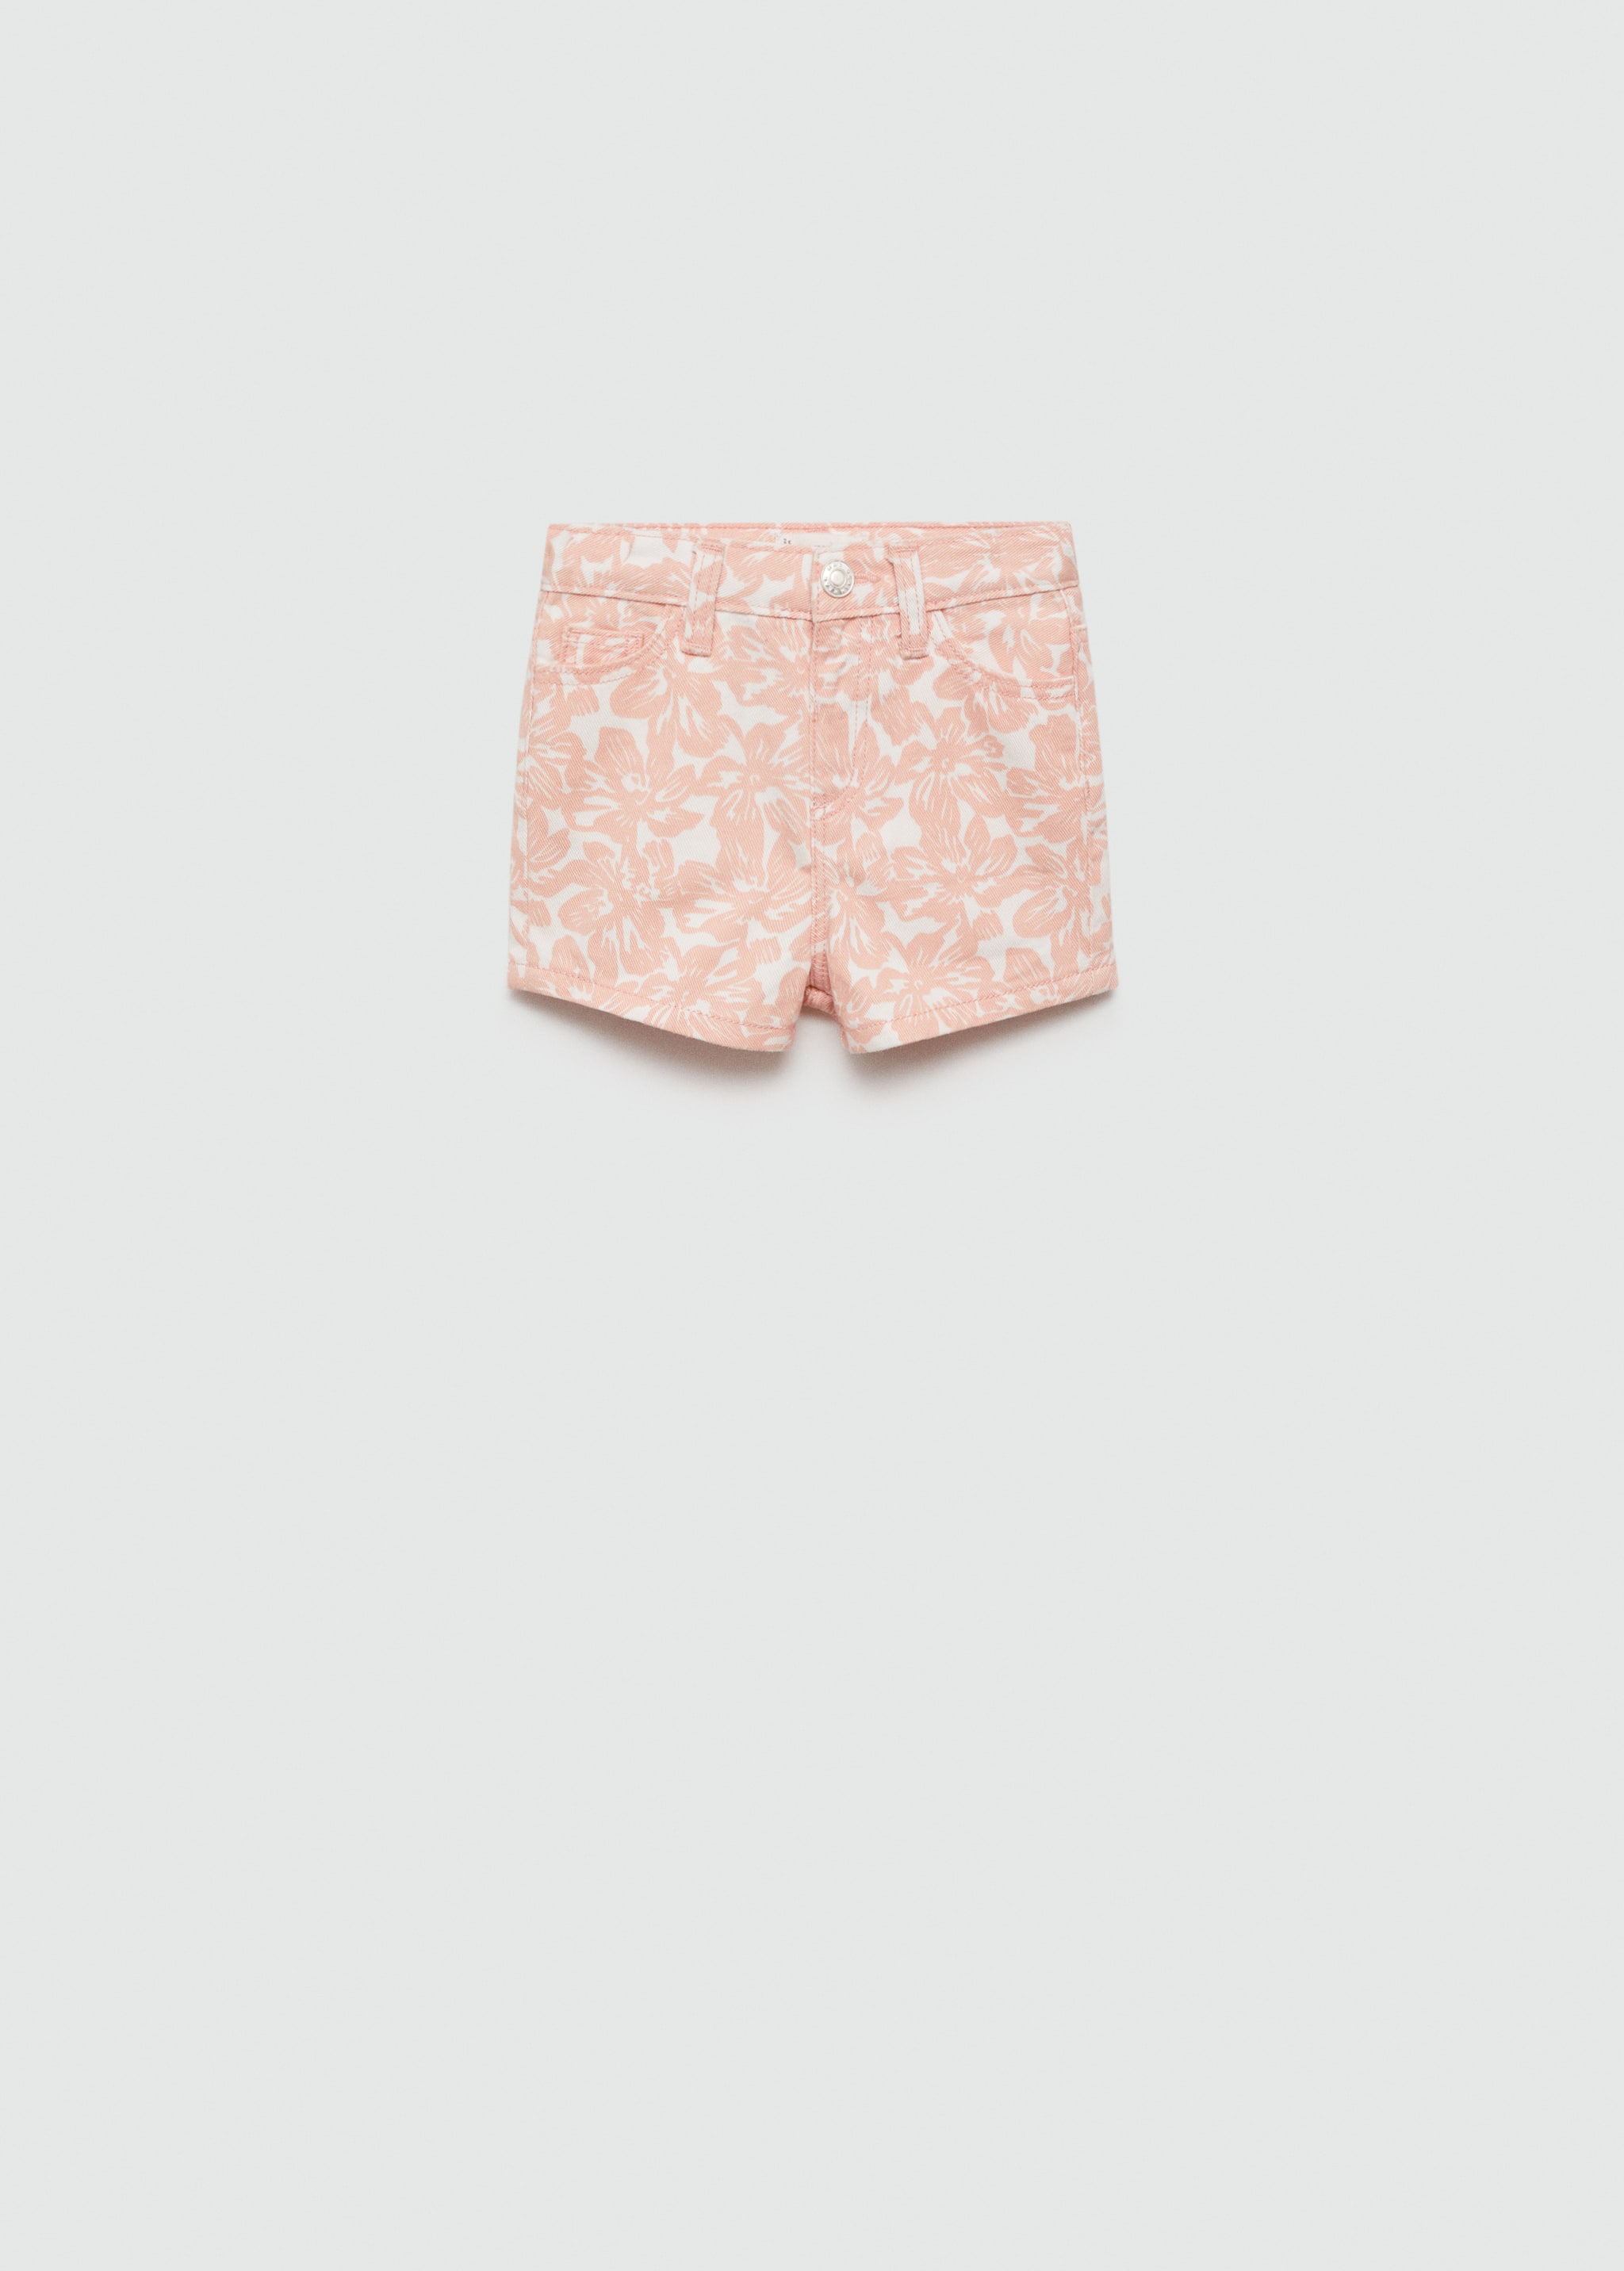 Floral print short - Article without model